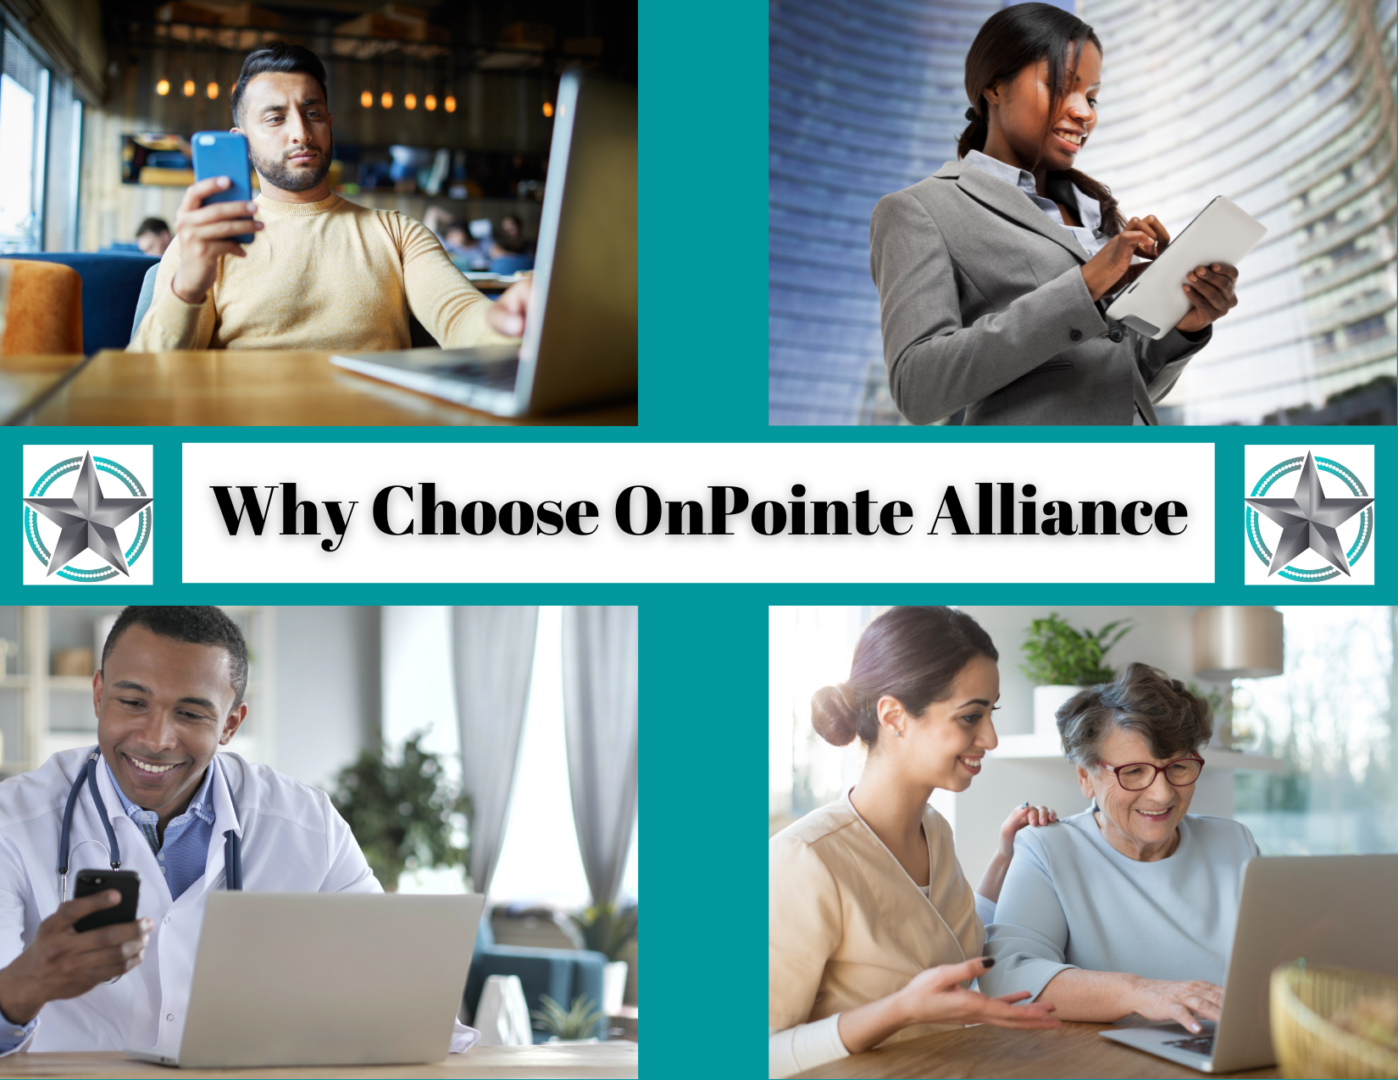 Why Choose OnPointe Alliance